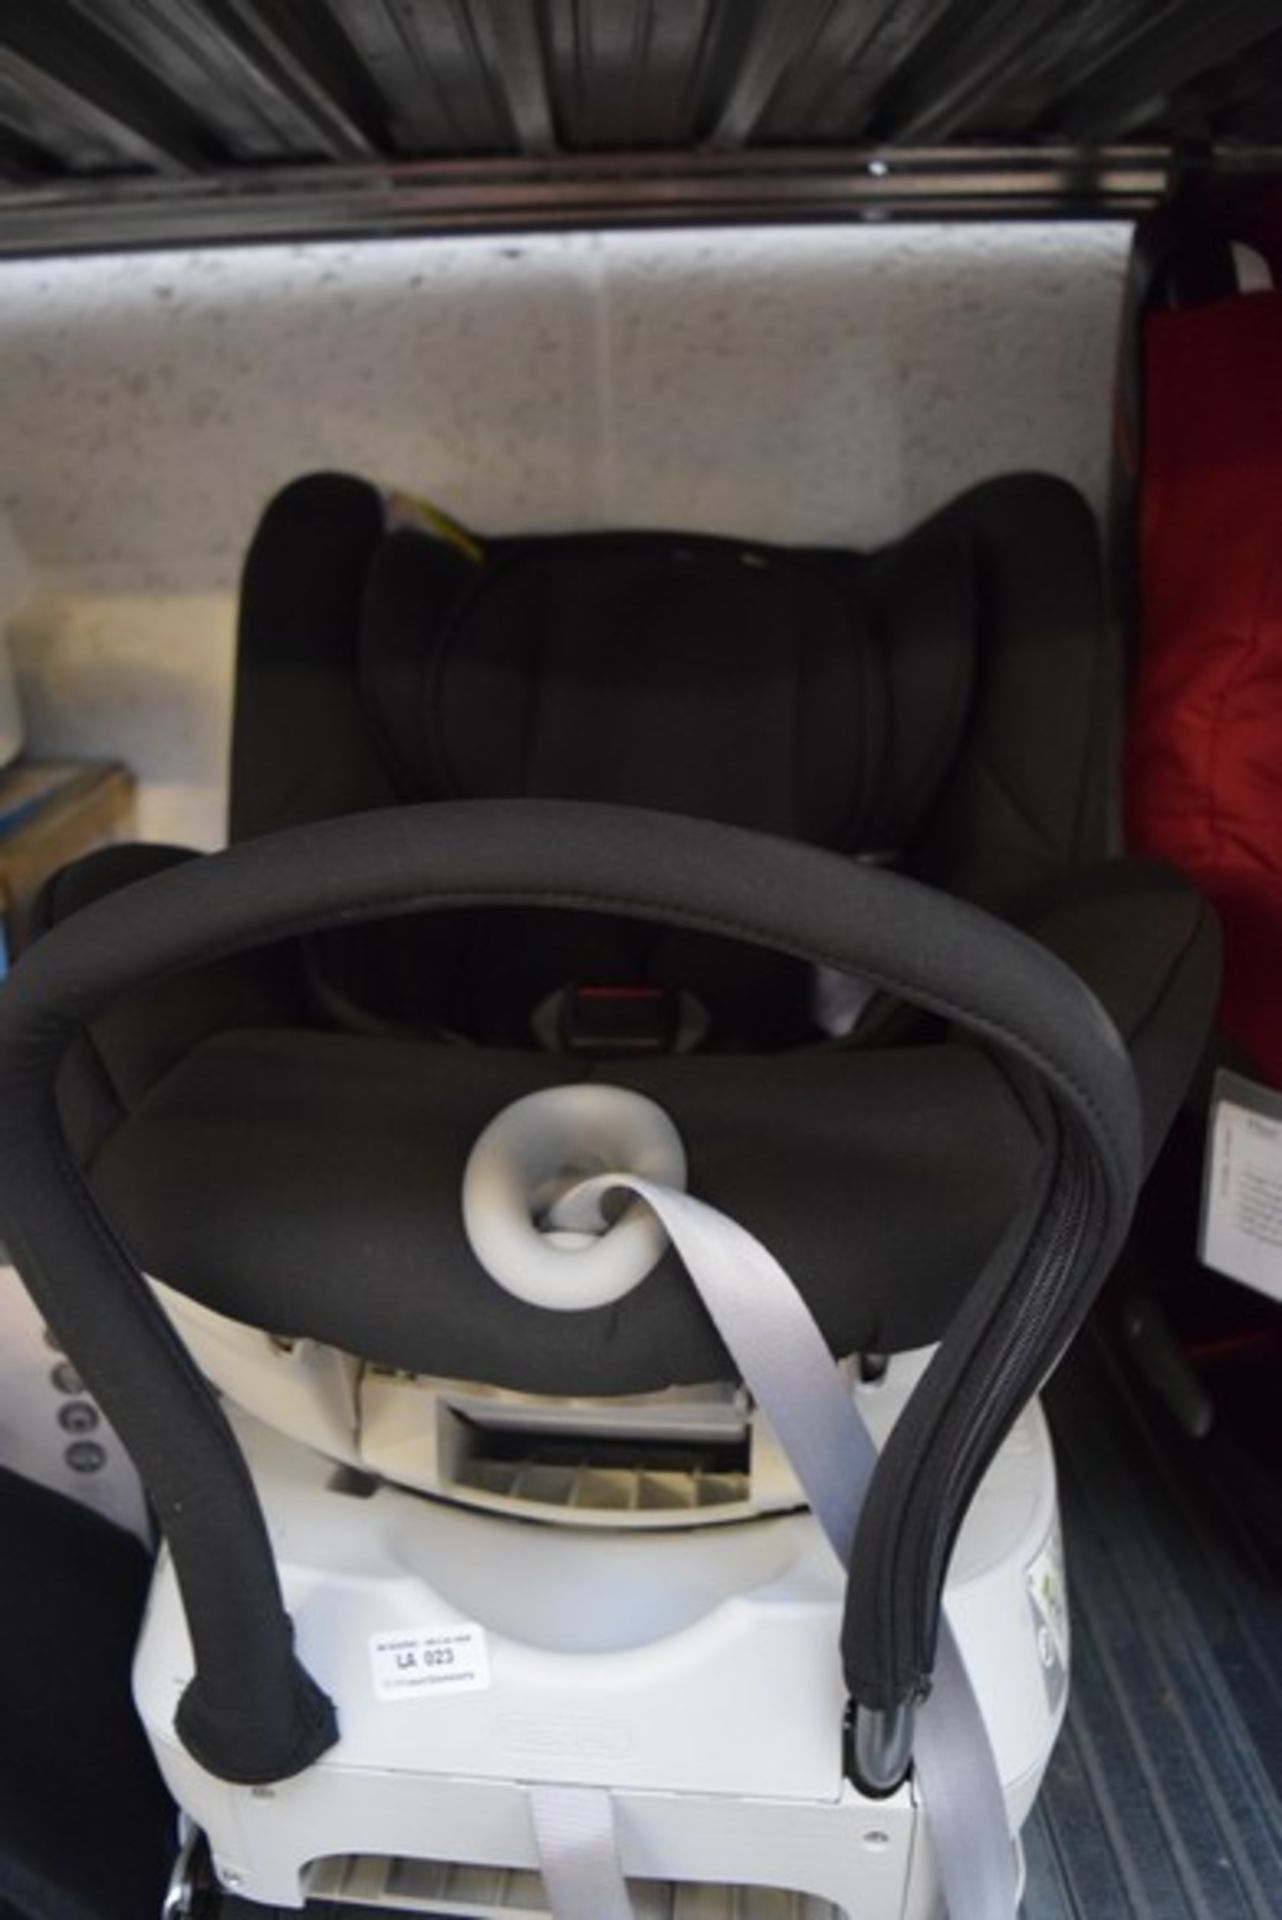 1 x BRITAX ROMER CAR SEAT RRP £230 *PLEASE NOTE THAT THE BID PRICE IS MULTIPLIED BY THE NUMBER OF